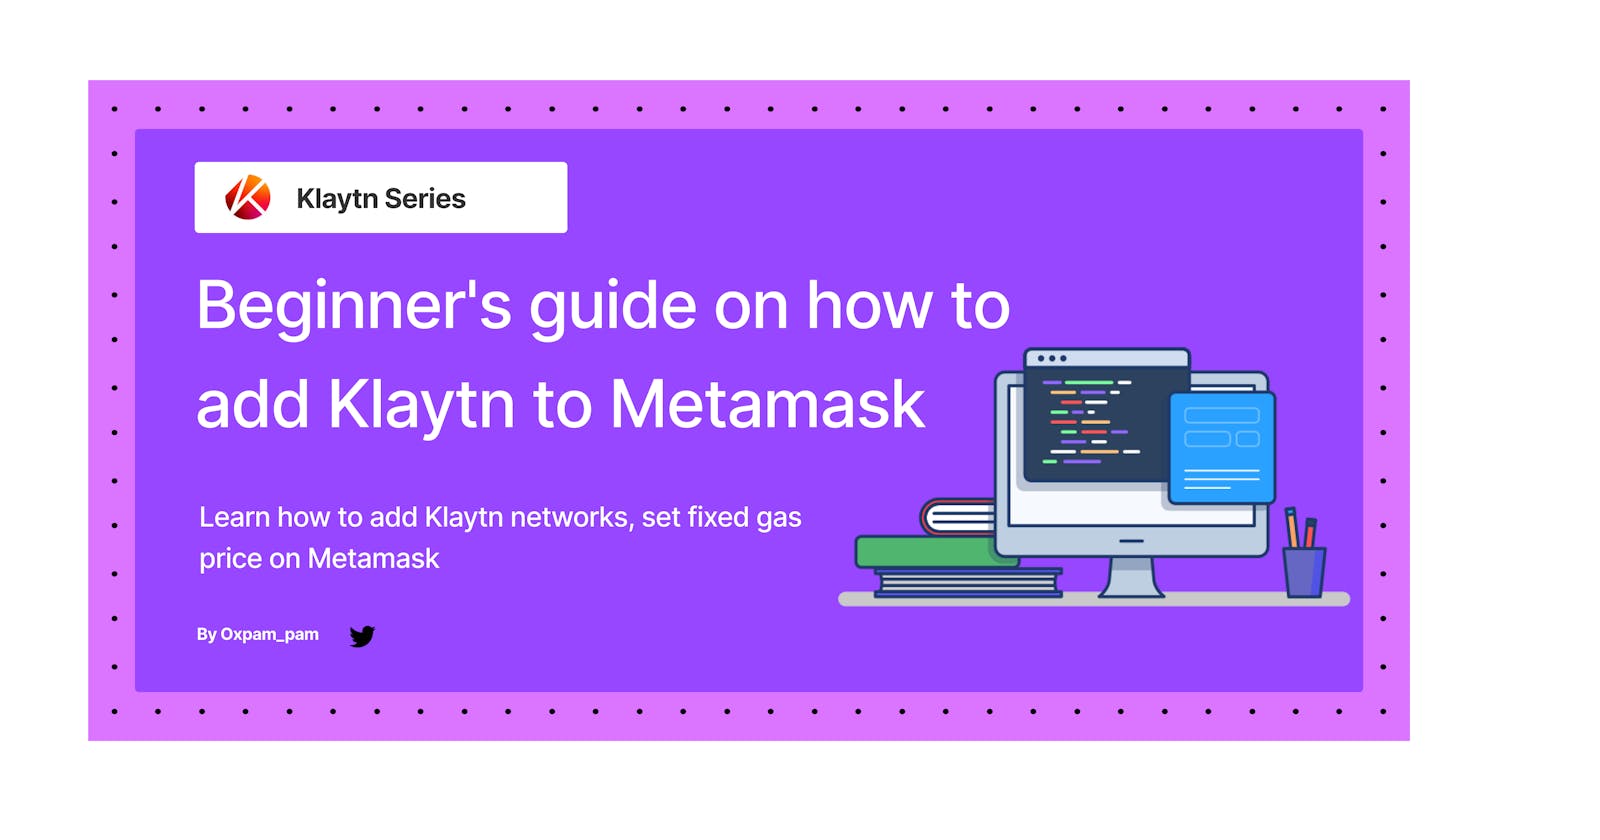 Beginner's guide on how to add Klaytn to Metamask